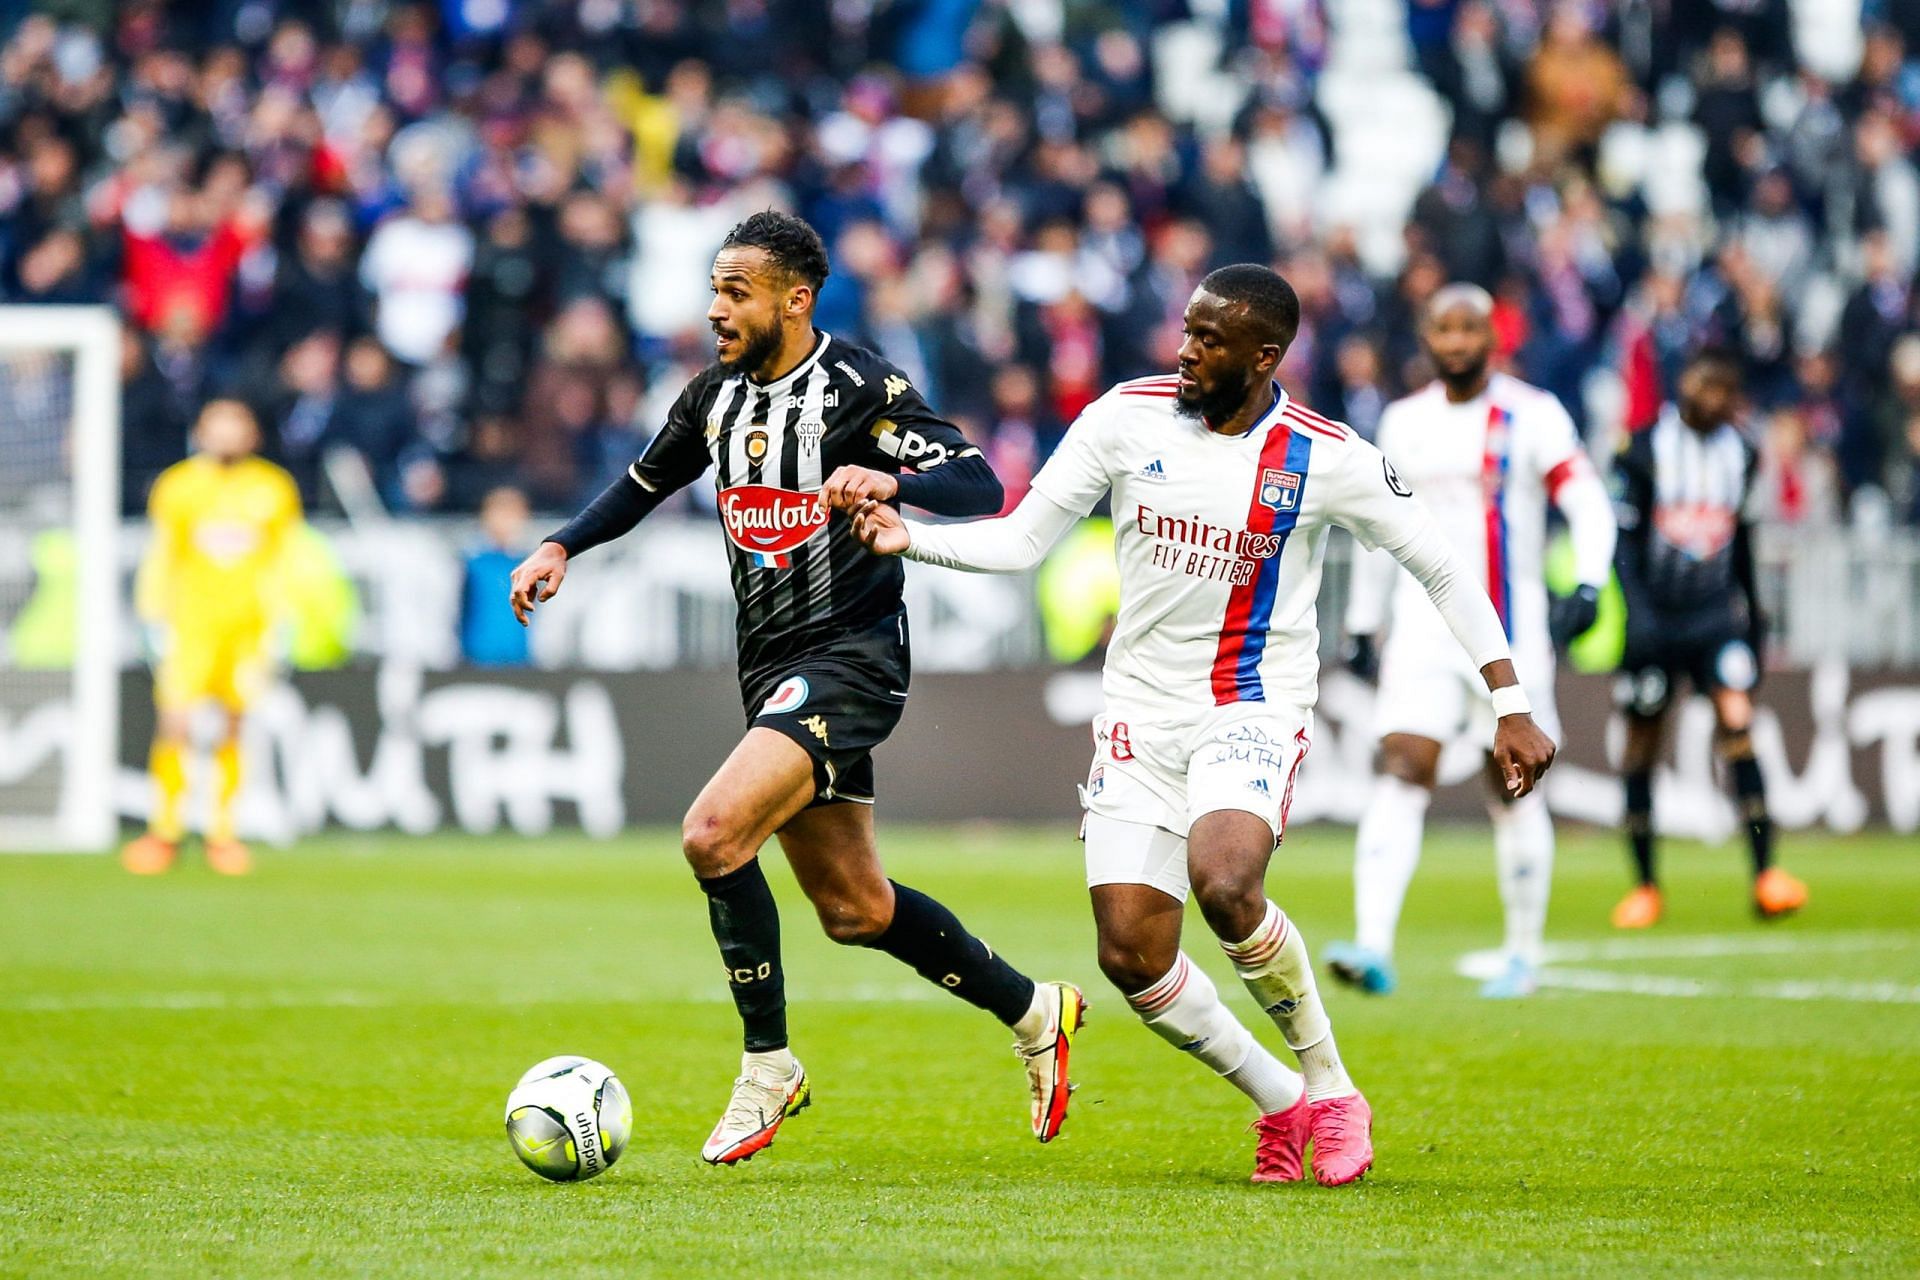 Lyon and Angers will meet in Ligue 1 on Saturday